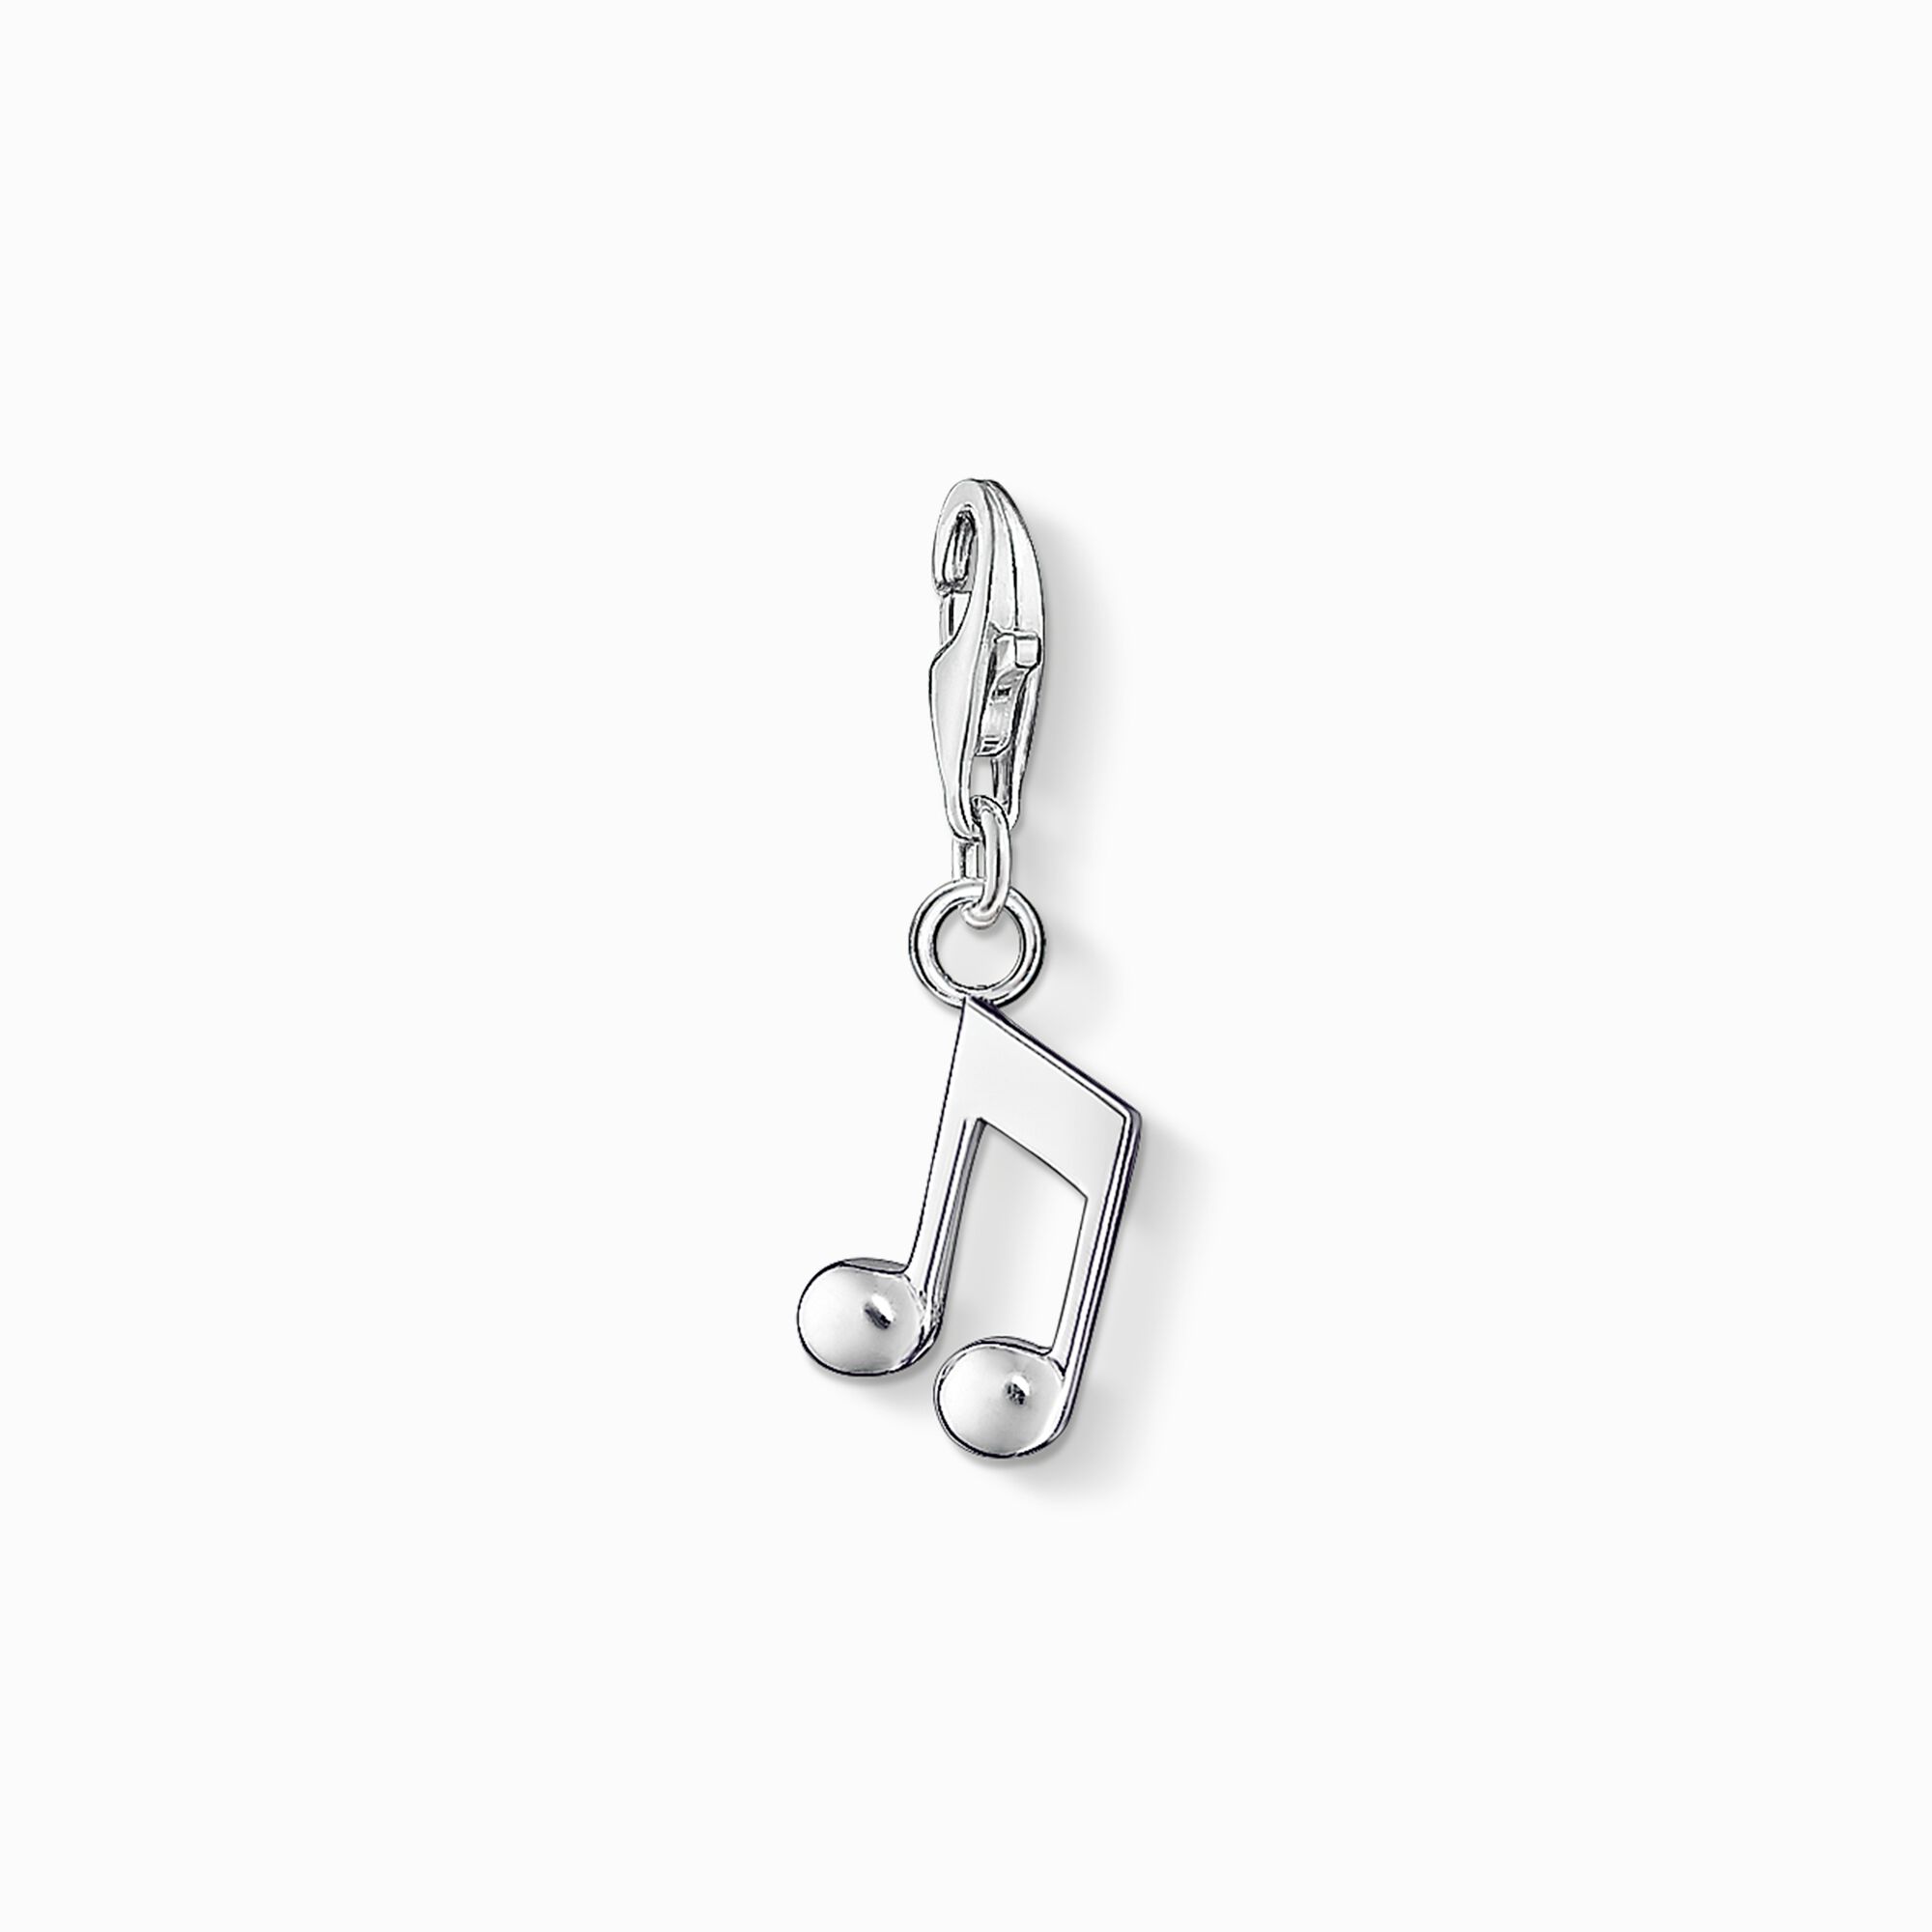 Charm pendant note from the Charm Club collection in the THOMAS SABO online store